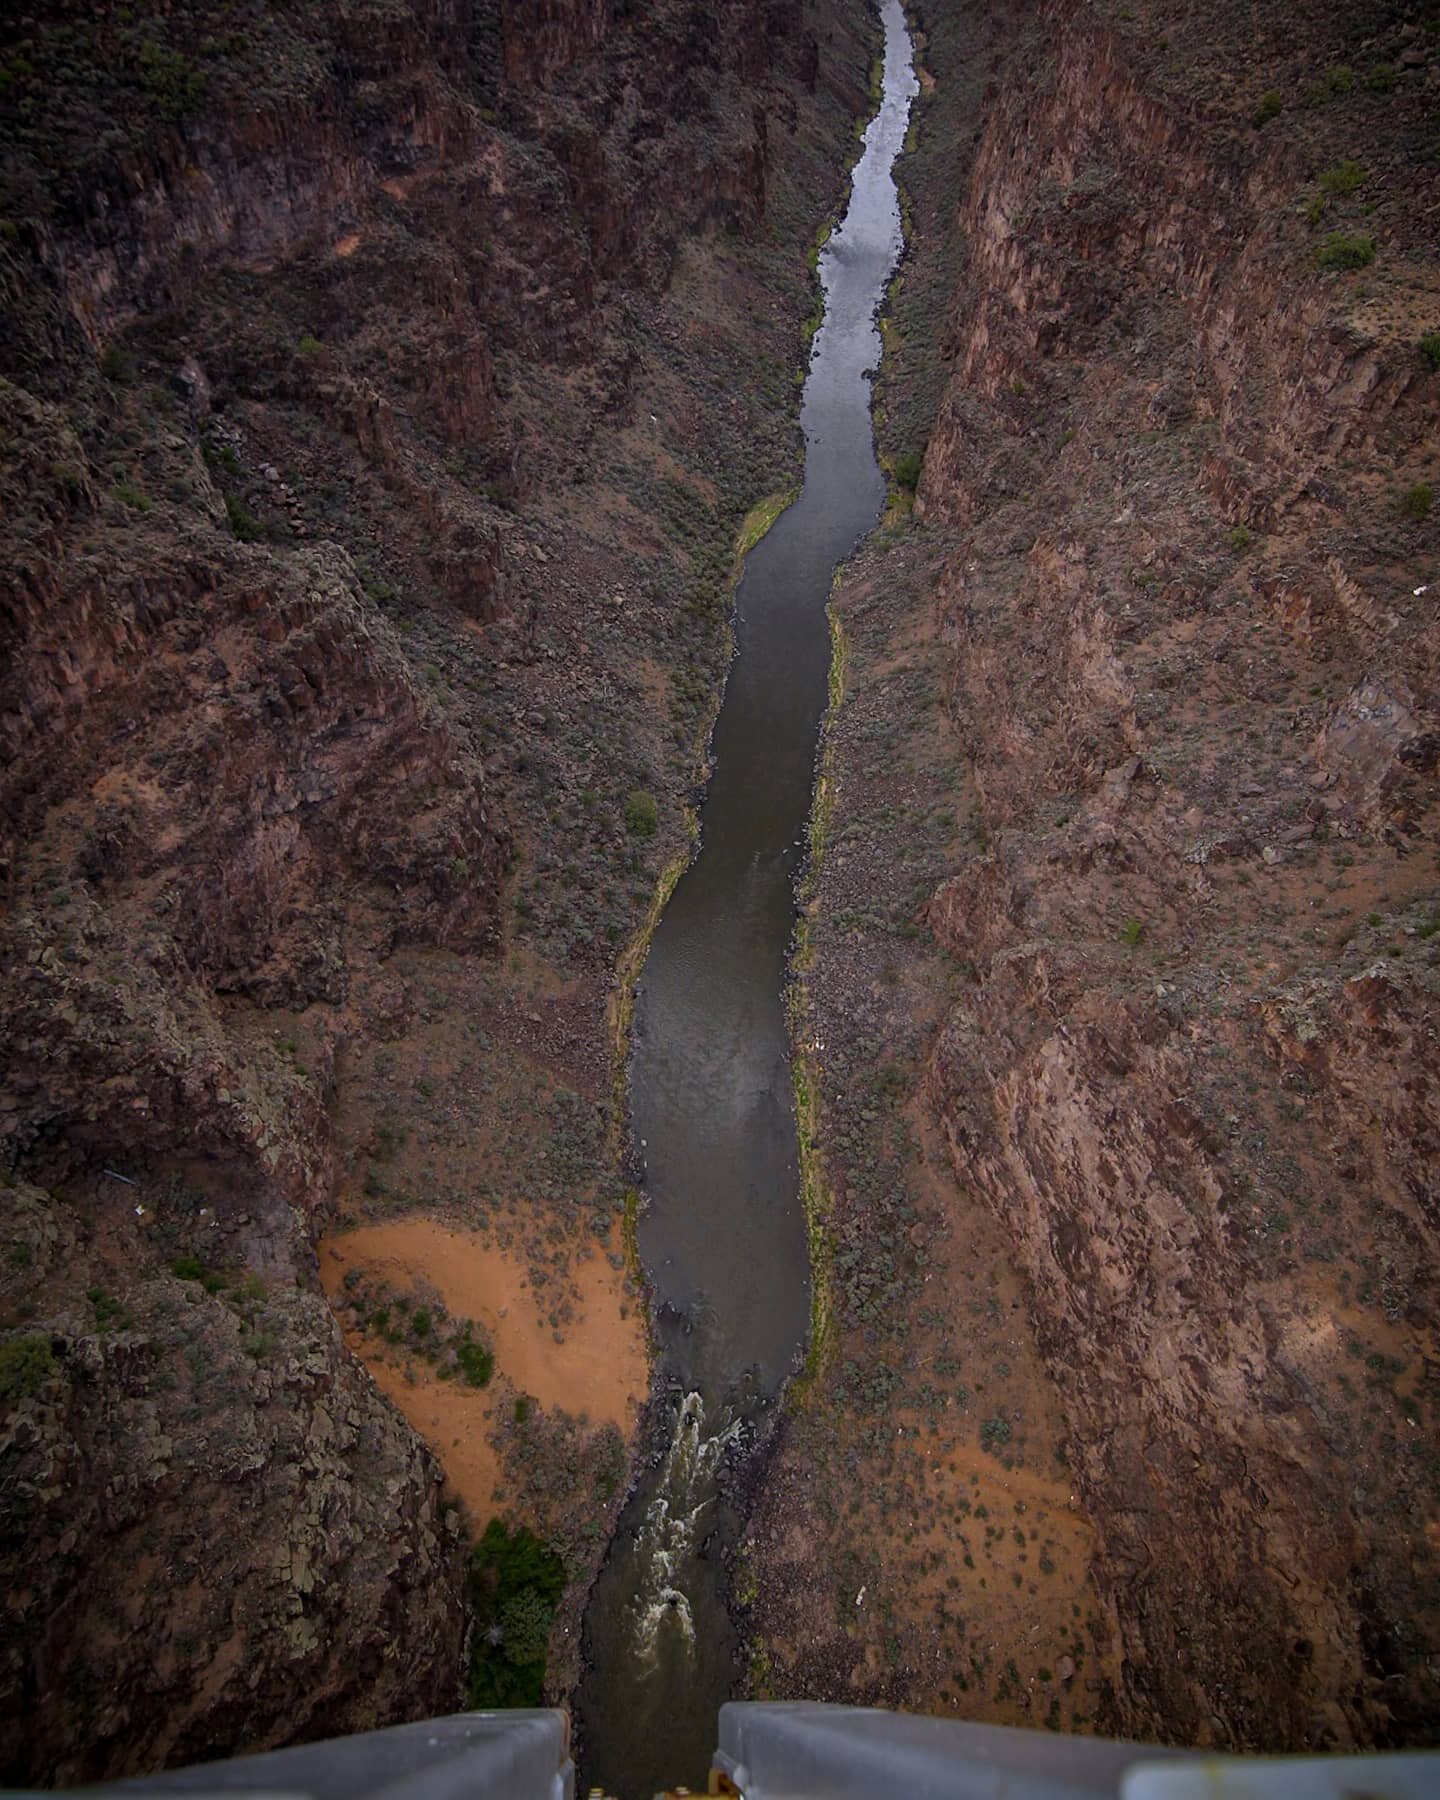 In Taos, we visited the Rio Grande Gorge Bridge, where you can look 656 feet down at the Rio Grande River. It is every bit vertigo inducing as it Umi's gorgeous. Here, shot on a wide angle lens, you can see the bridge on which we stood, down to the r